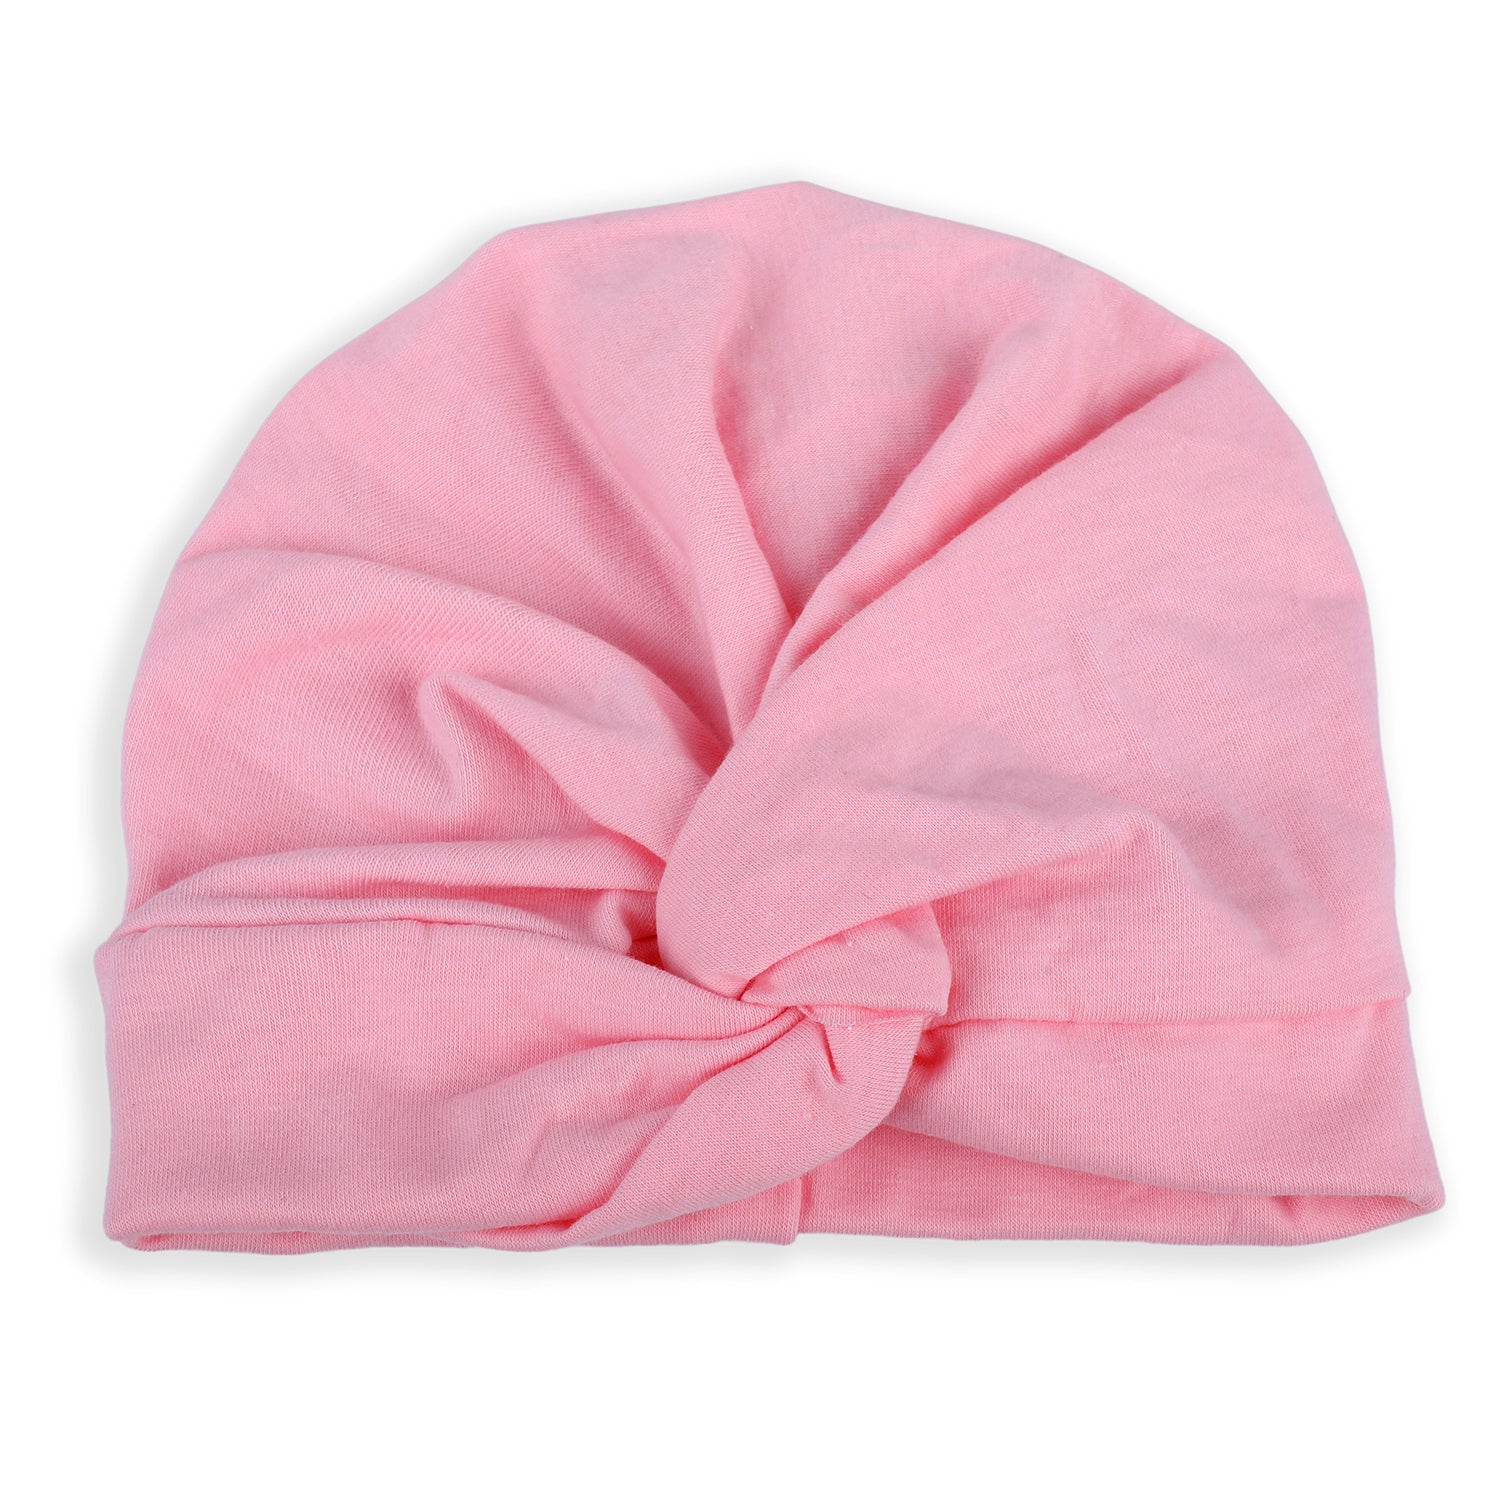 Cute Knotted Turban Cap Infant Beanie - Pink